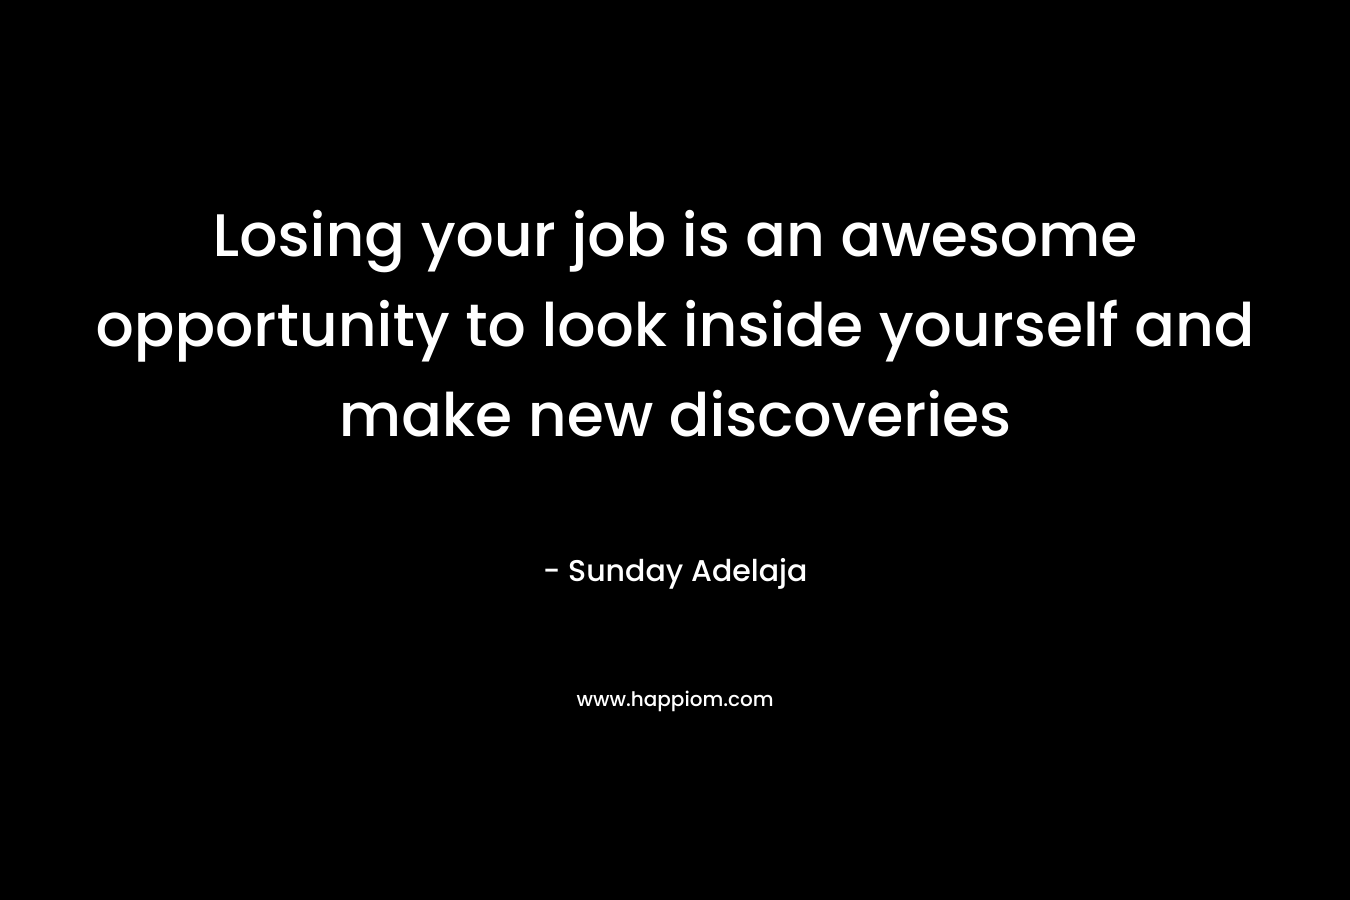 Losing your job is an awesome opportunity to look inside yourself and make new discoveries